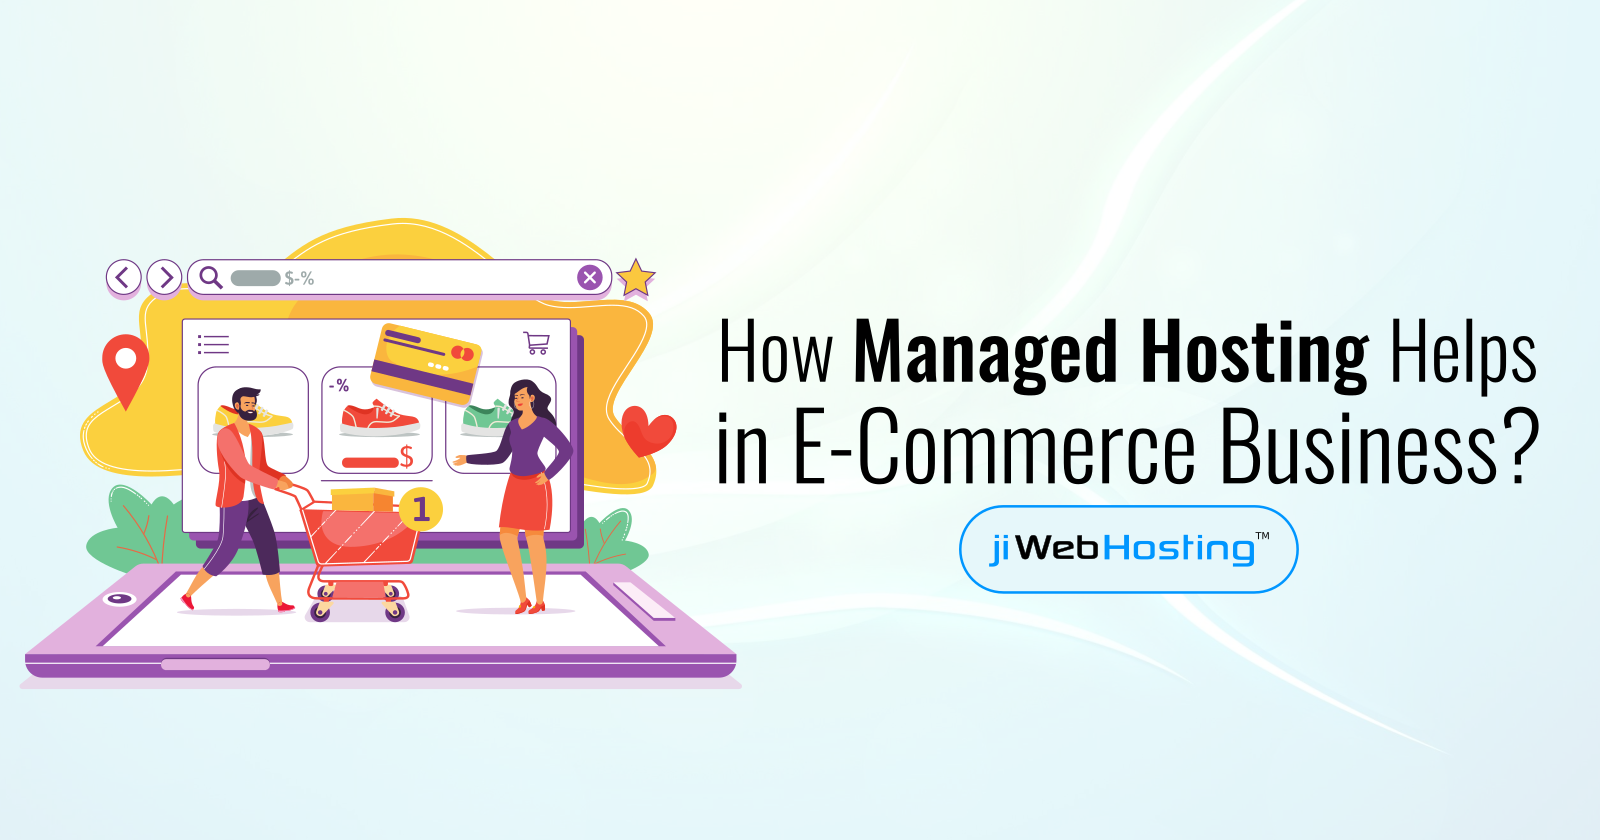 How Managed Hosting Helps In E-commerce Business?